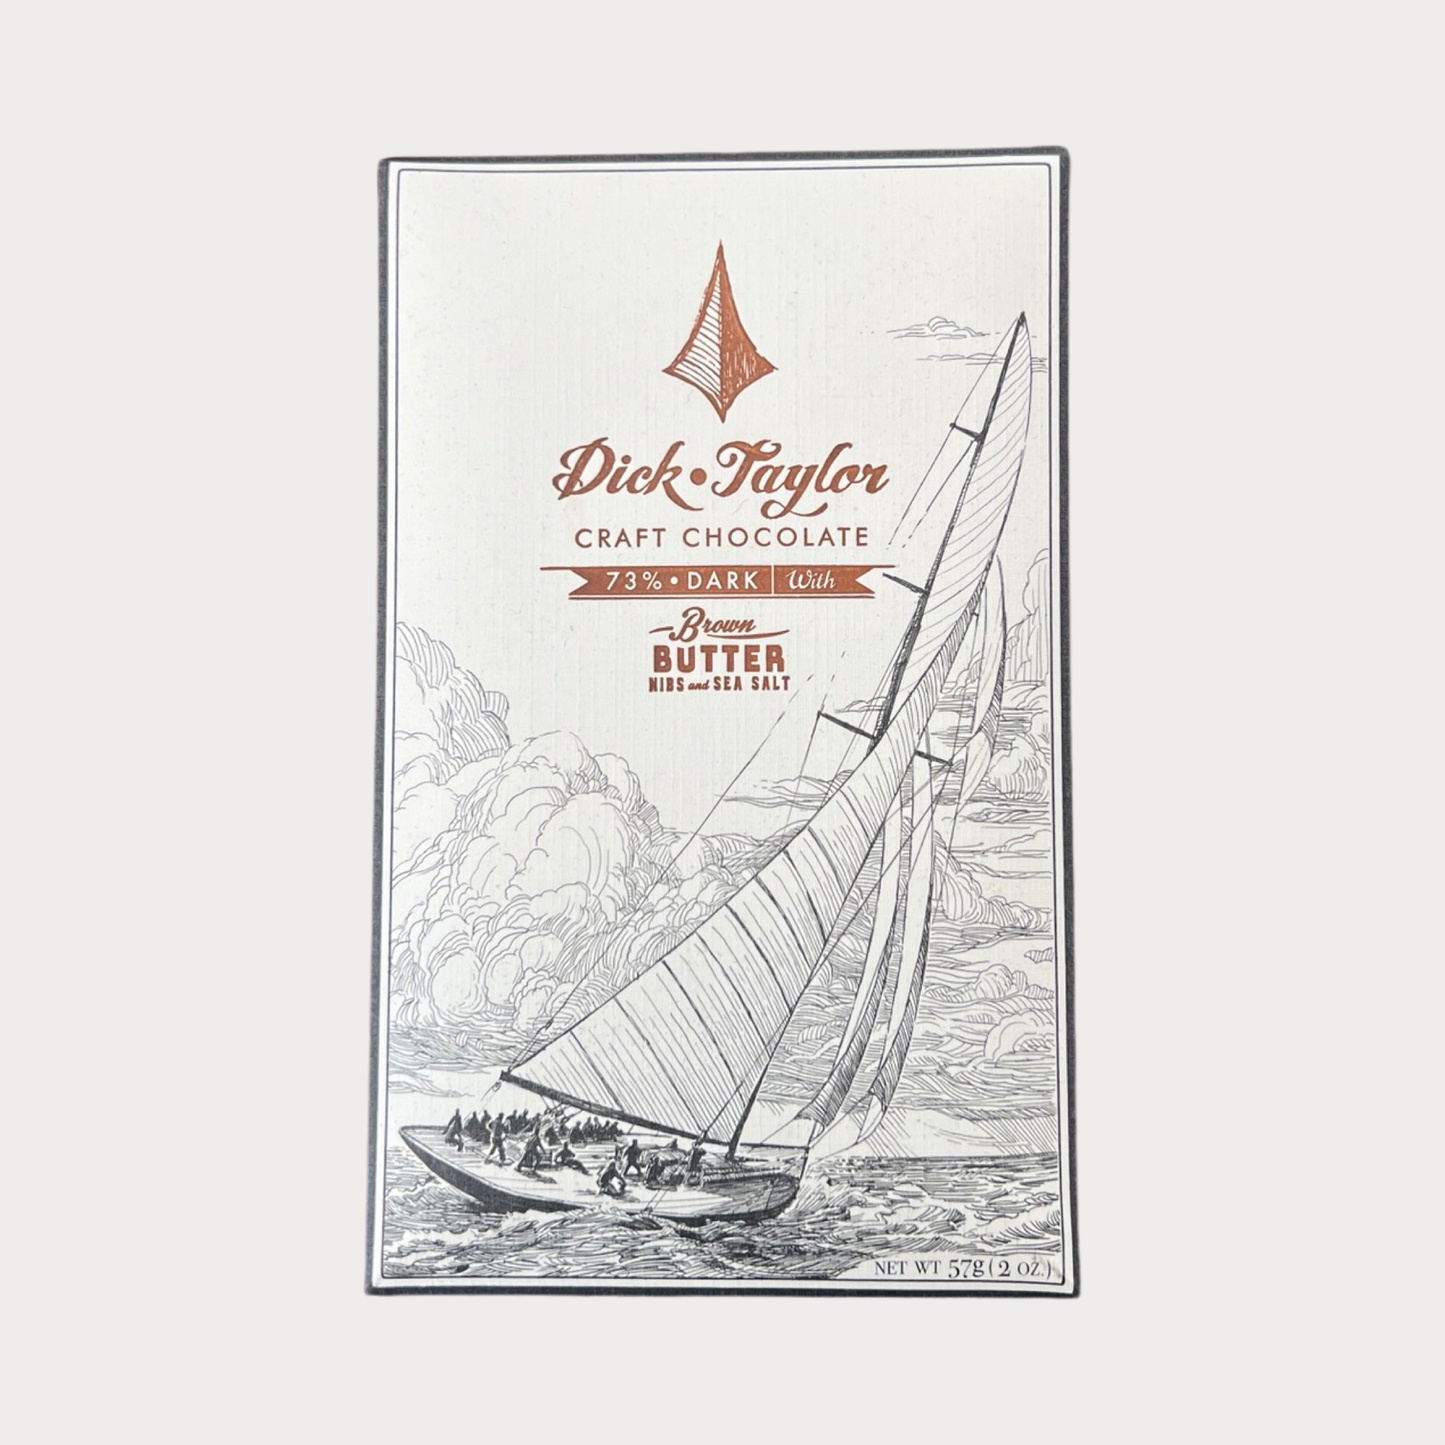 Dick Taylor Brown Butter with Nibs & Sea Salt, 2oz